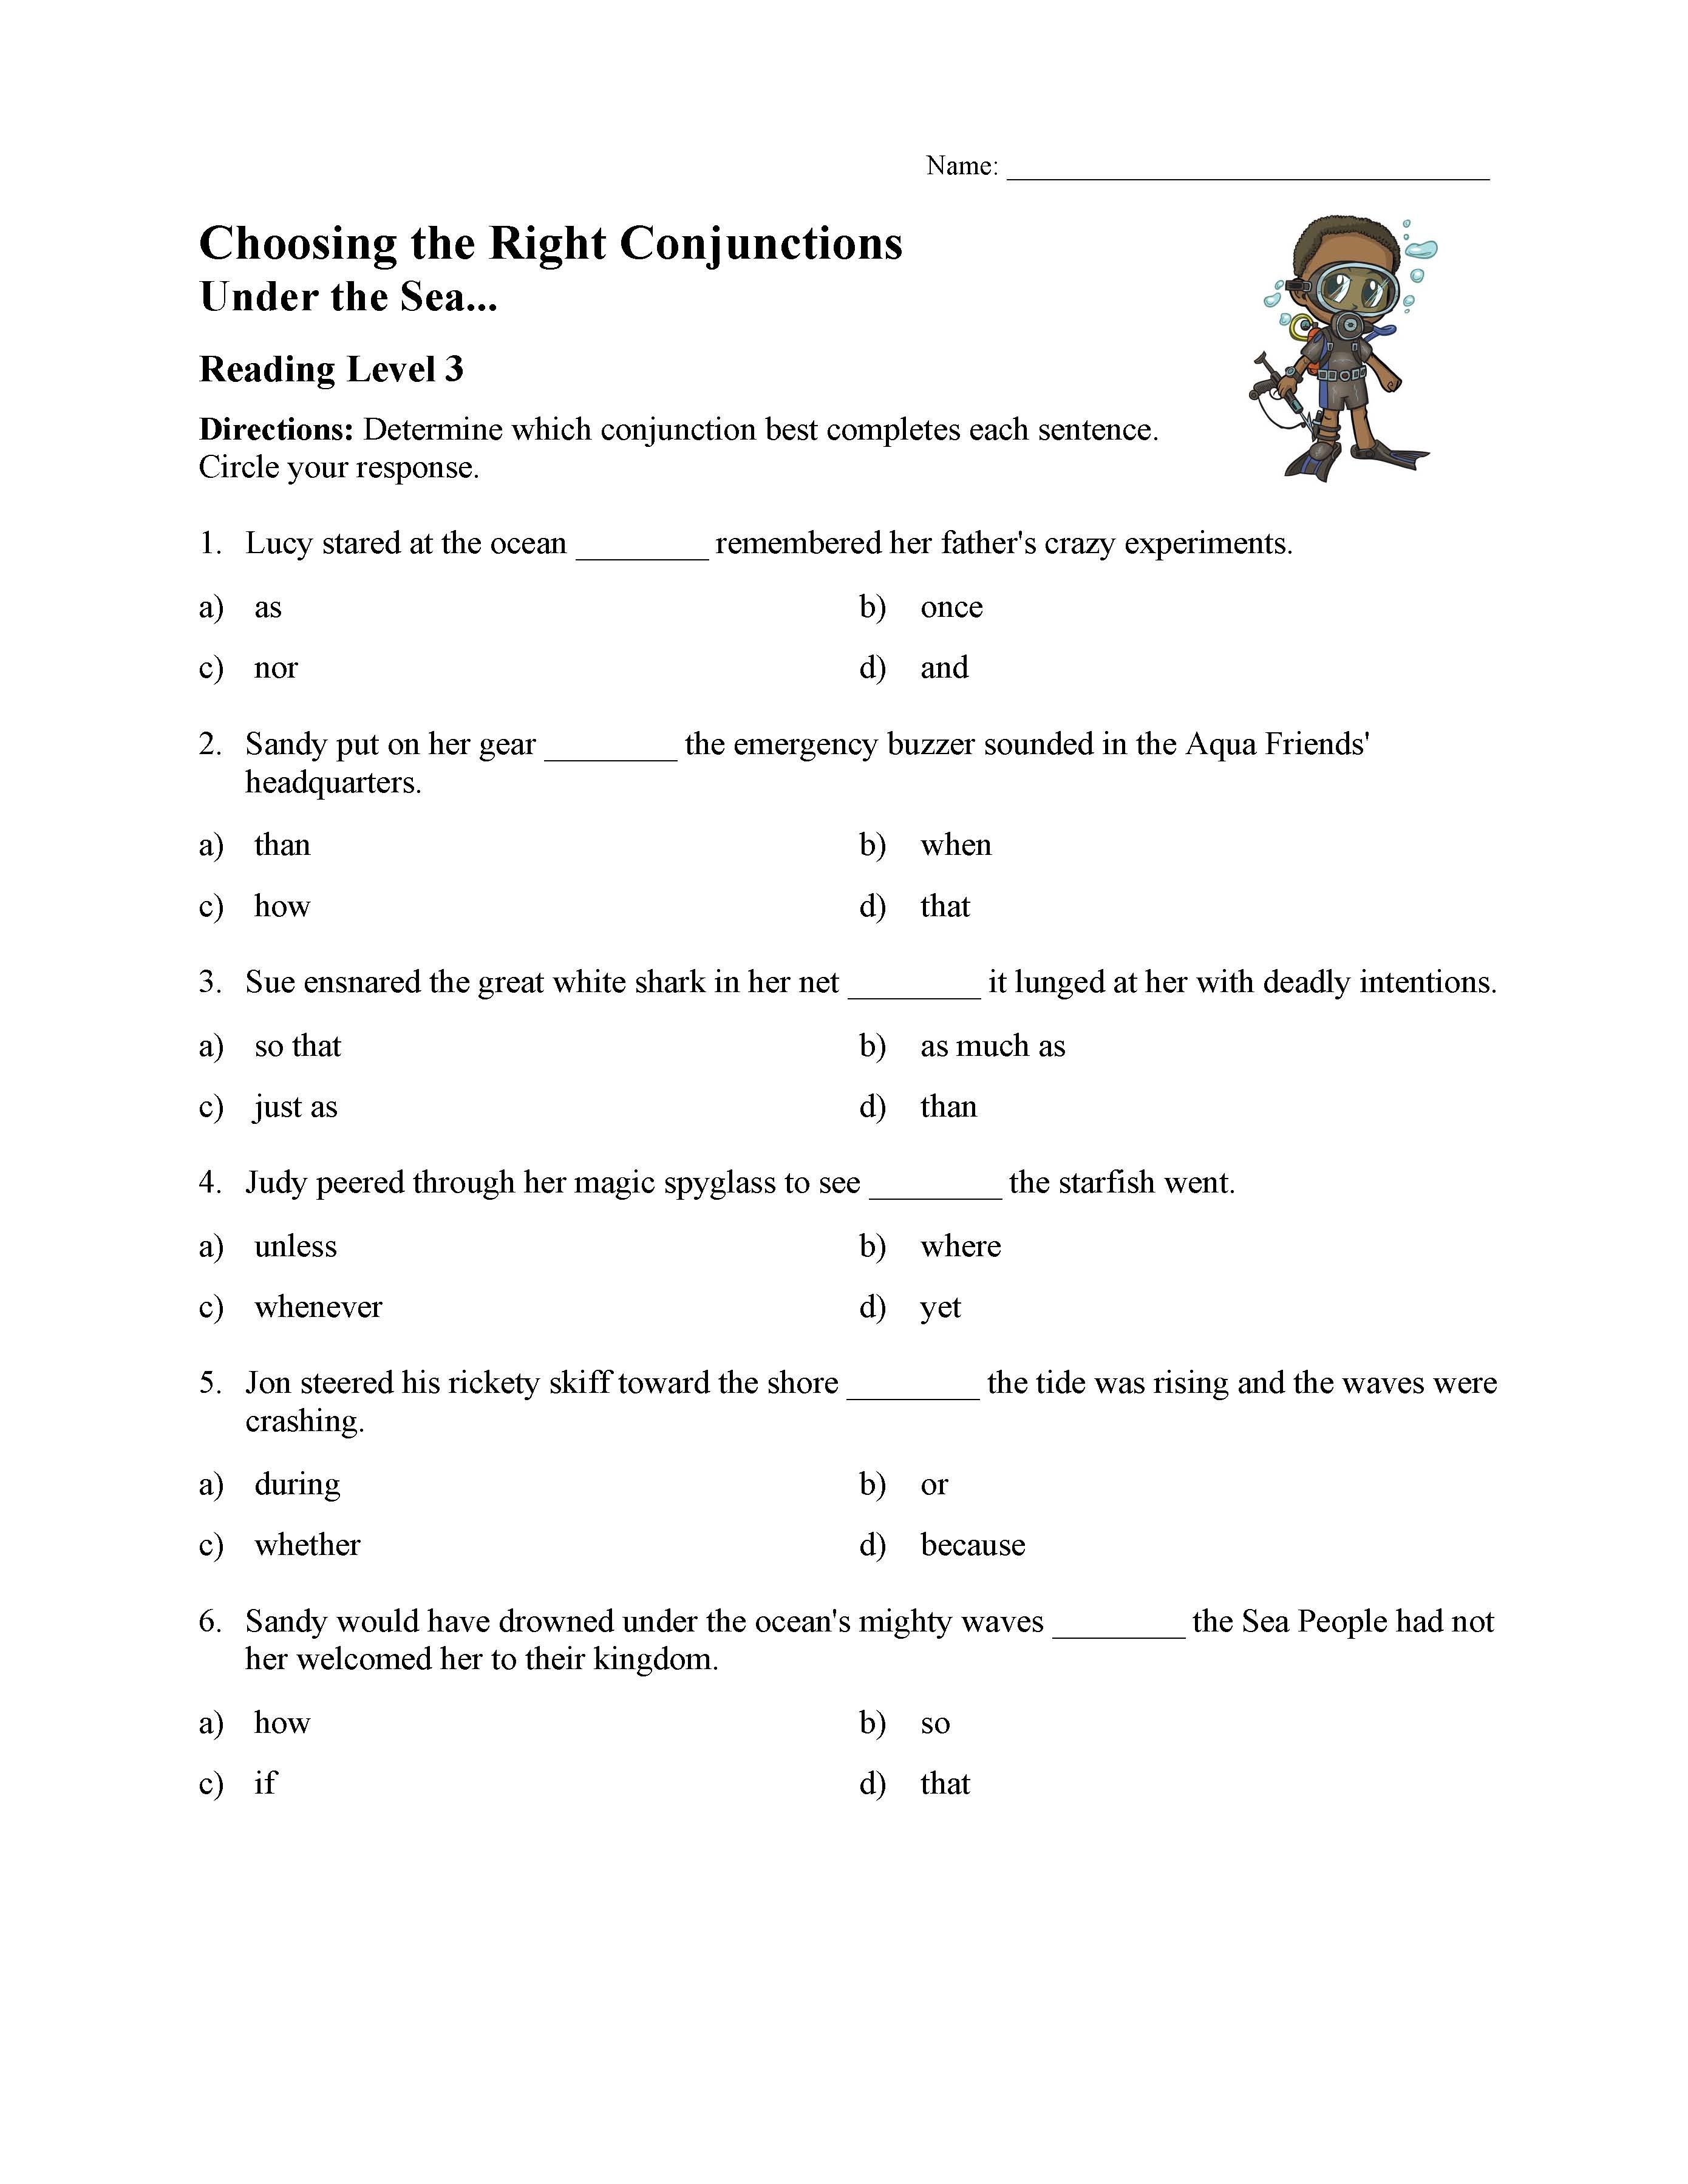 This is a preview image of the Choosing the Right Conjunction Worksheet - Reading Level 3.